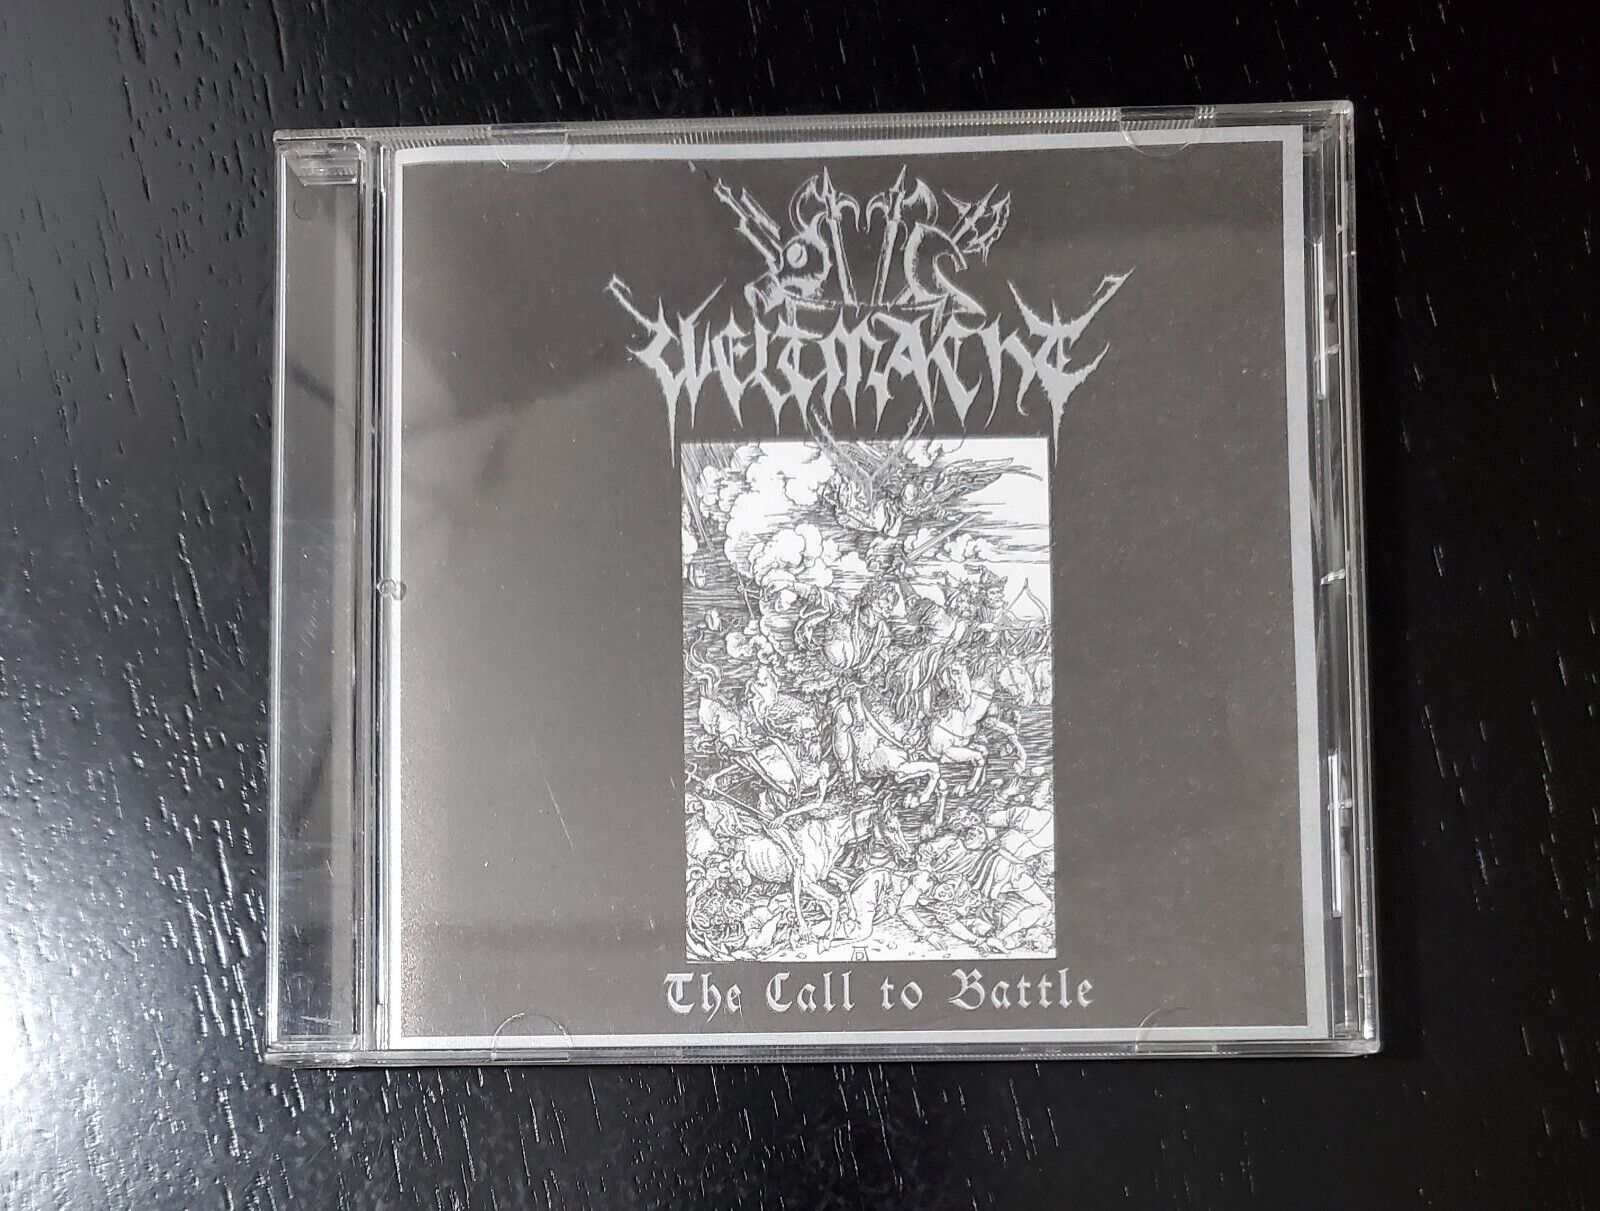 Weltmacht Call To Battle Black Metal CD Elegy Records 2001 Limited Edition